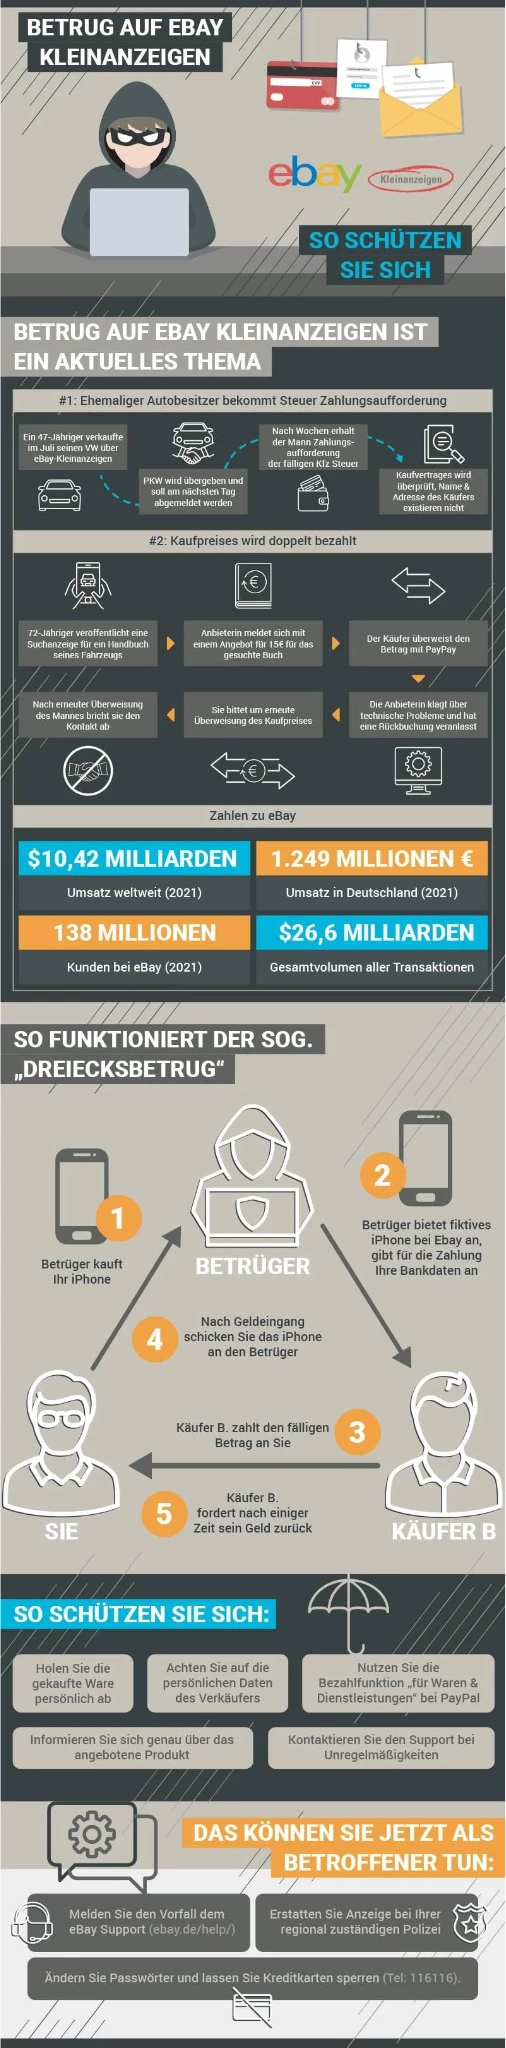 Infographic - Measures against fraud